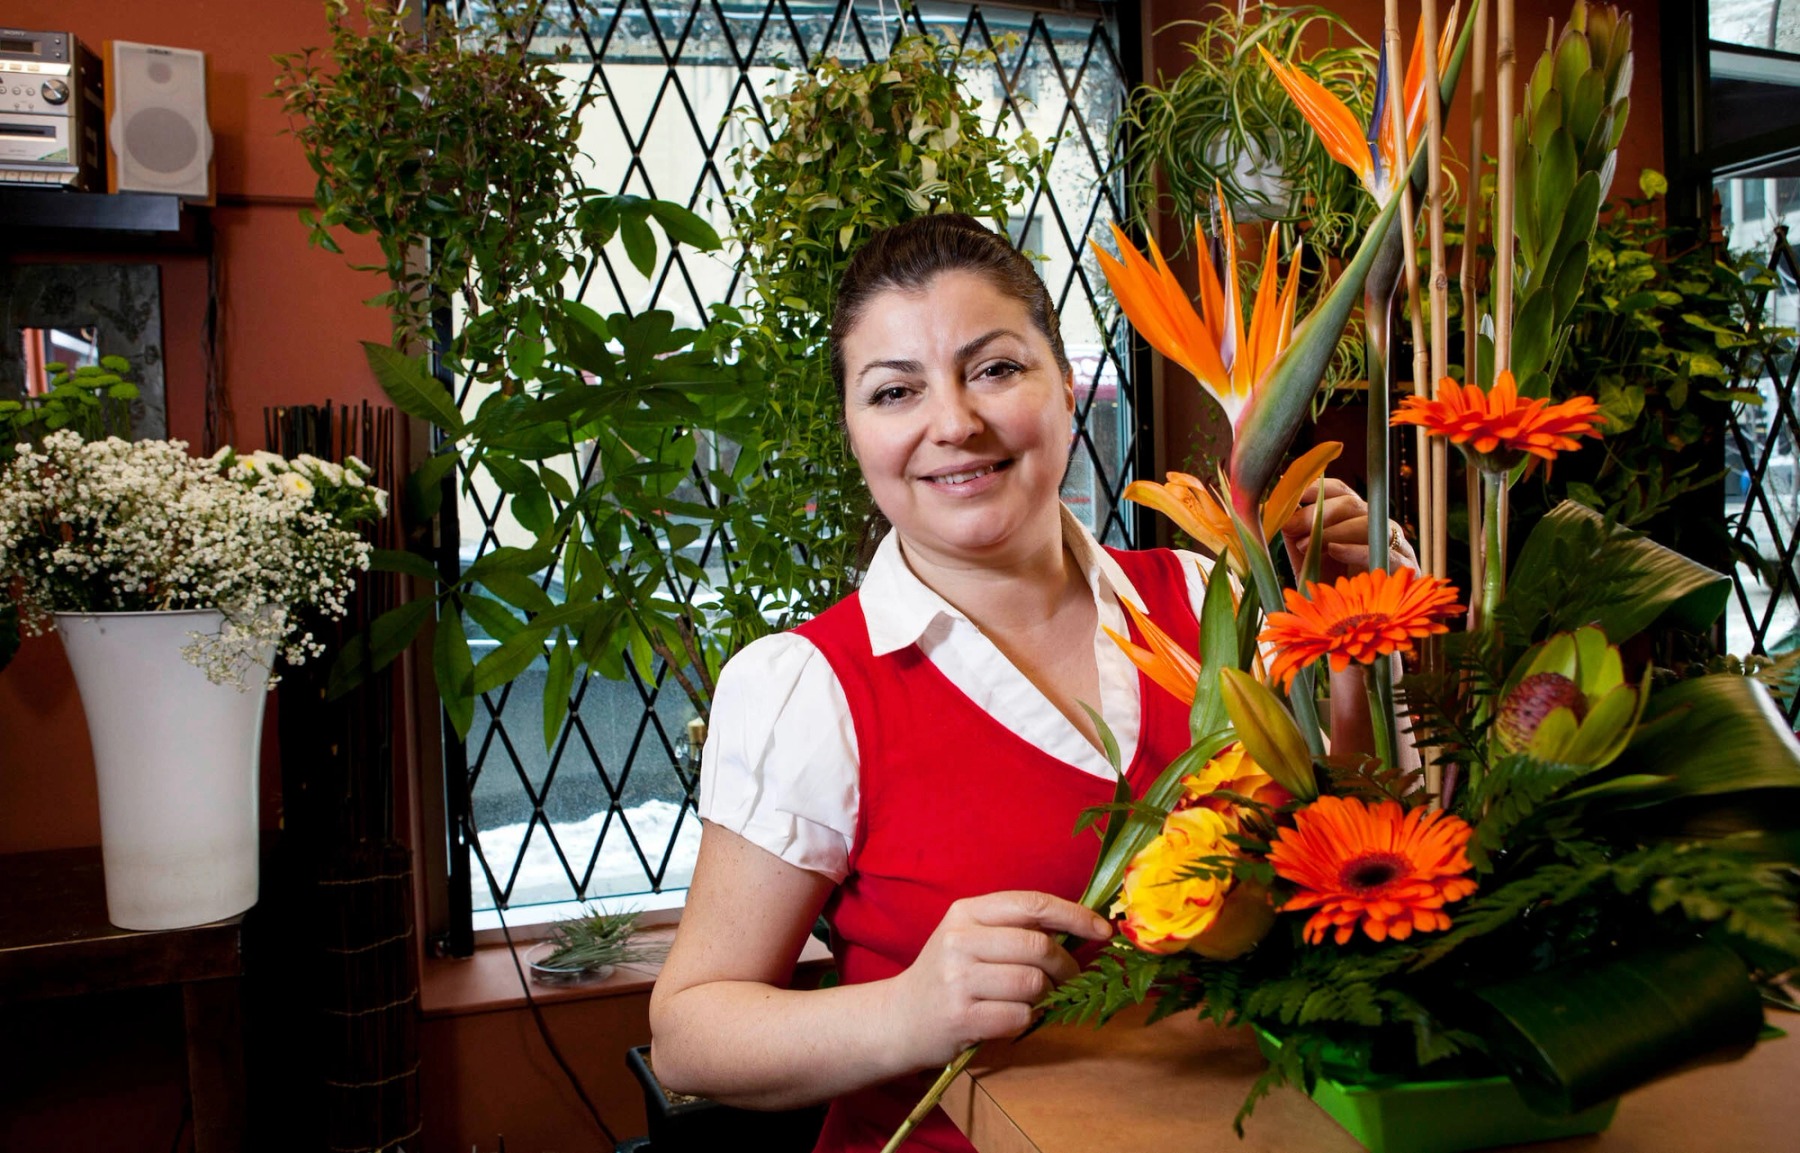 A woman wearing a white shirt and red vest poses behind an arrangement of orange and yellow flowers in a warmly-lit store.